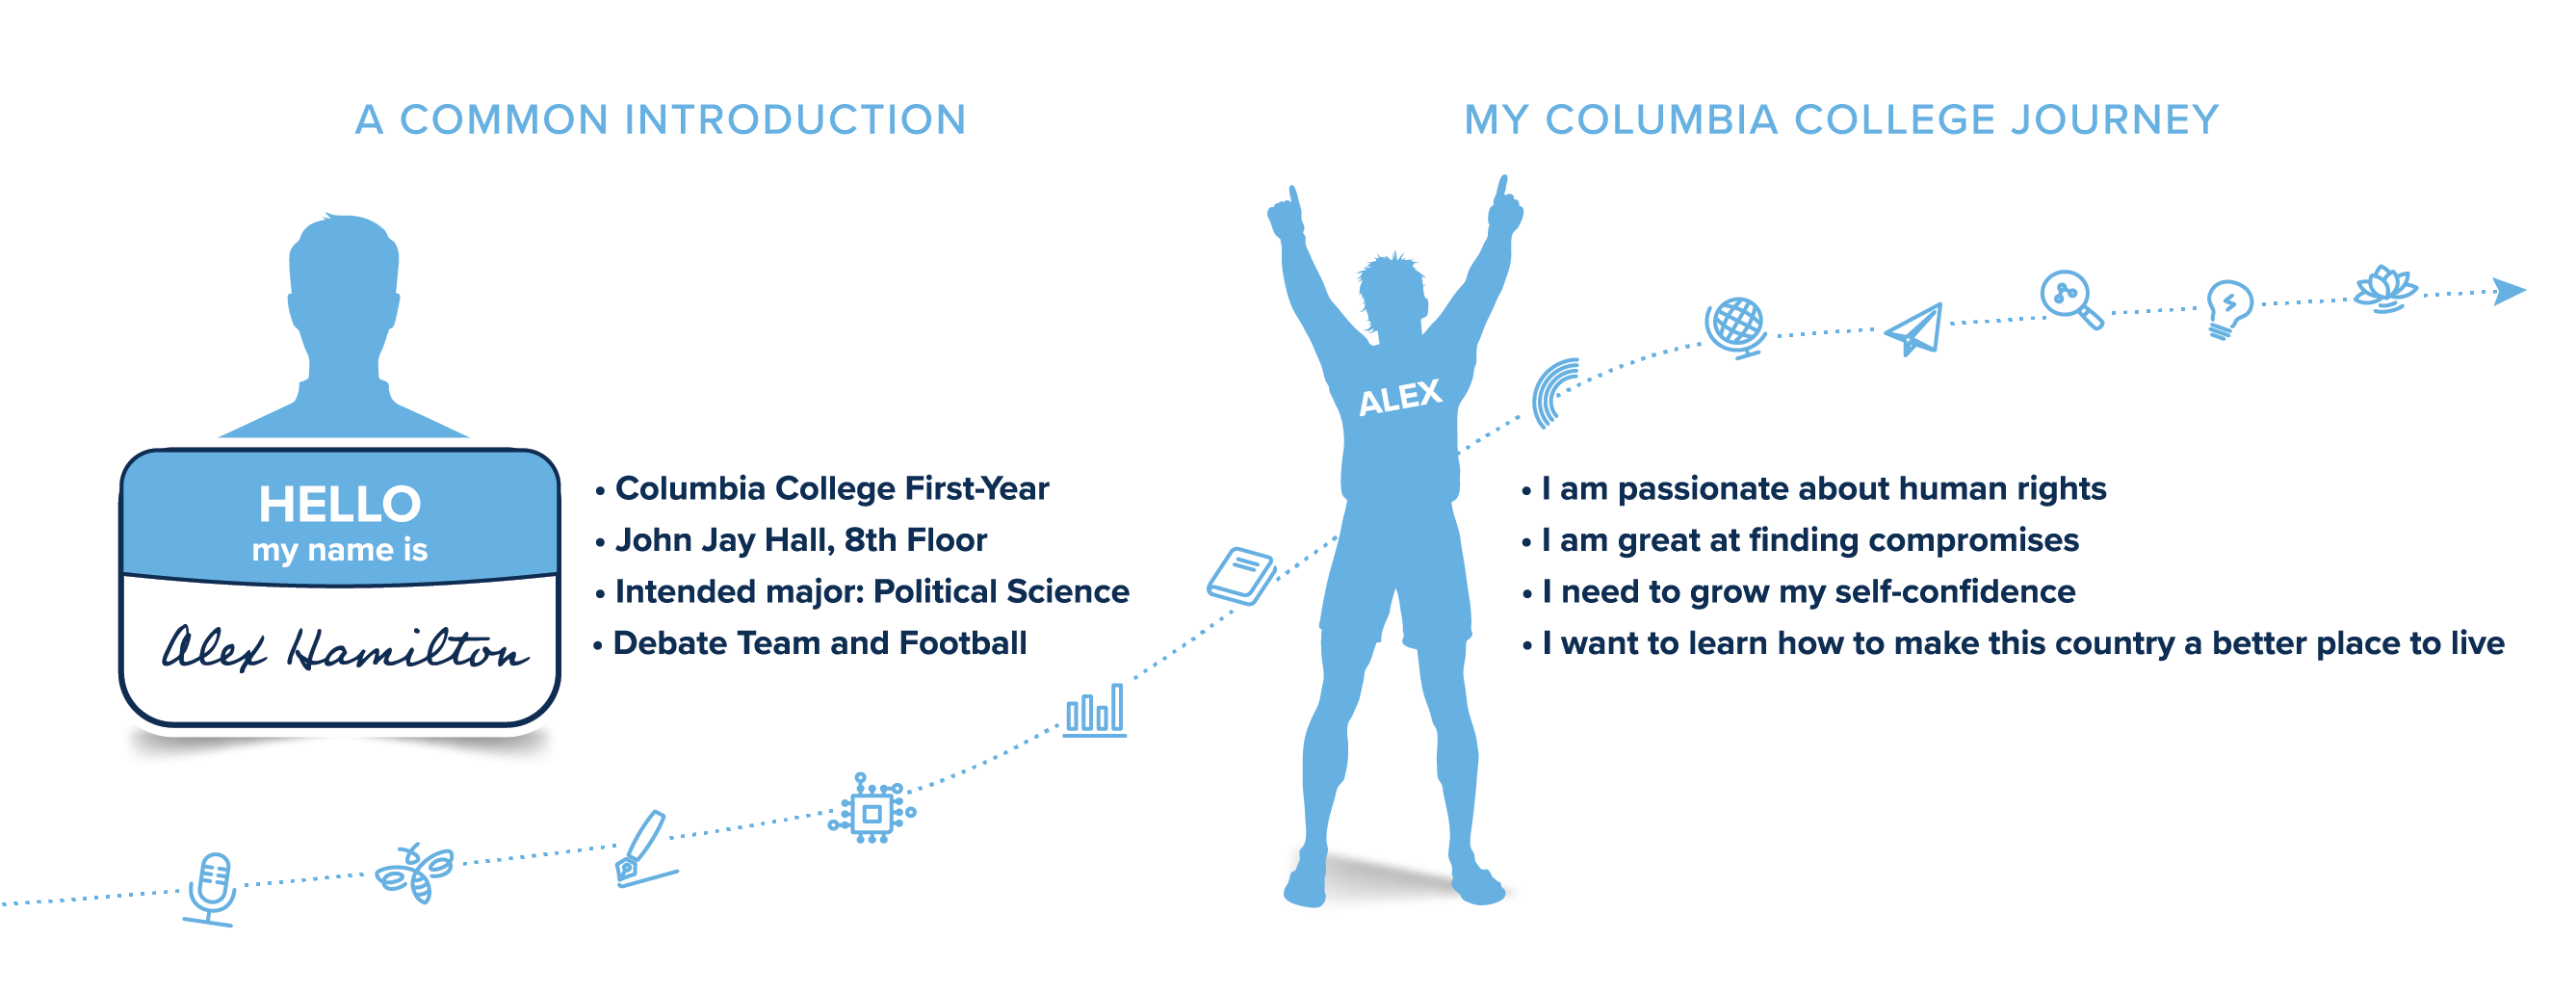 An illustration of a student's experience with My Columbia College Journey